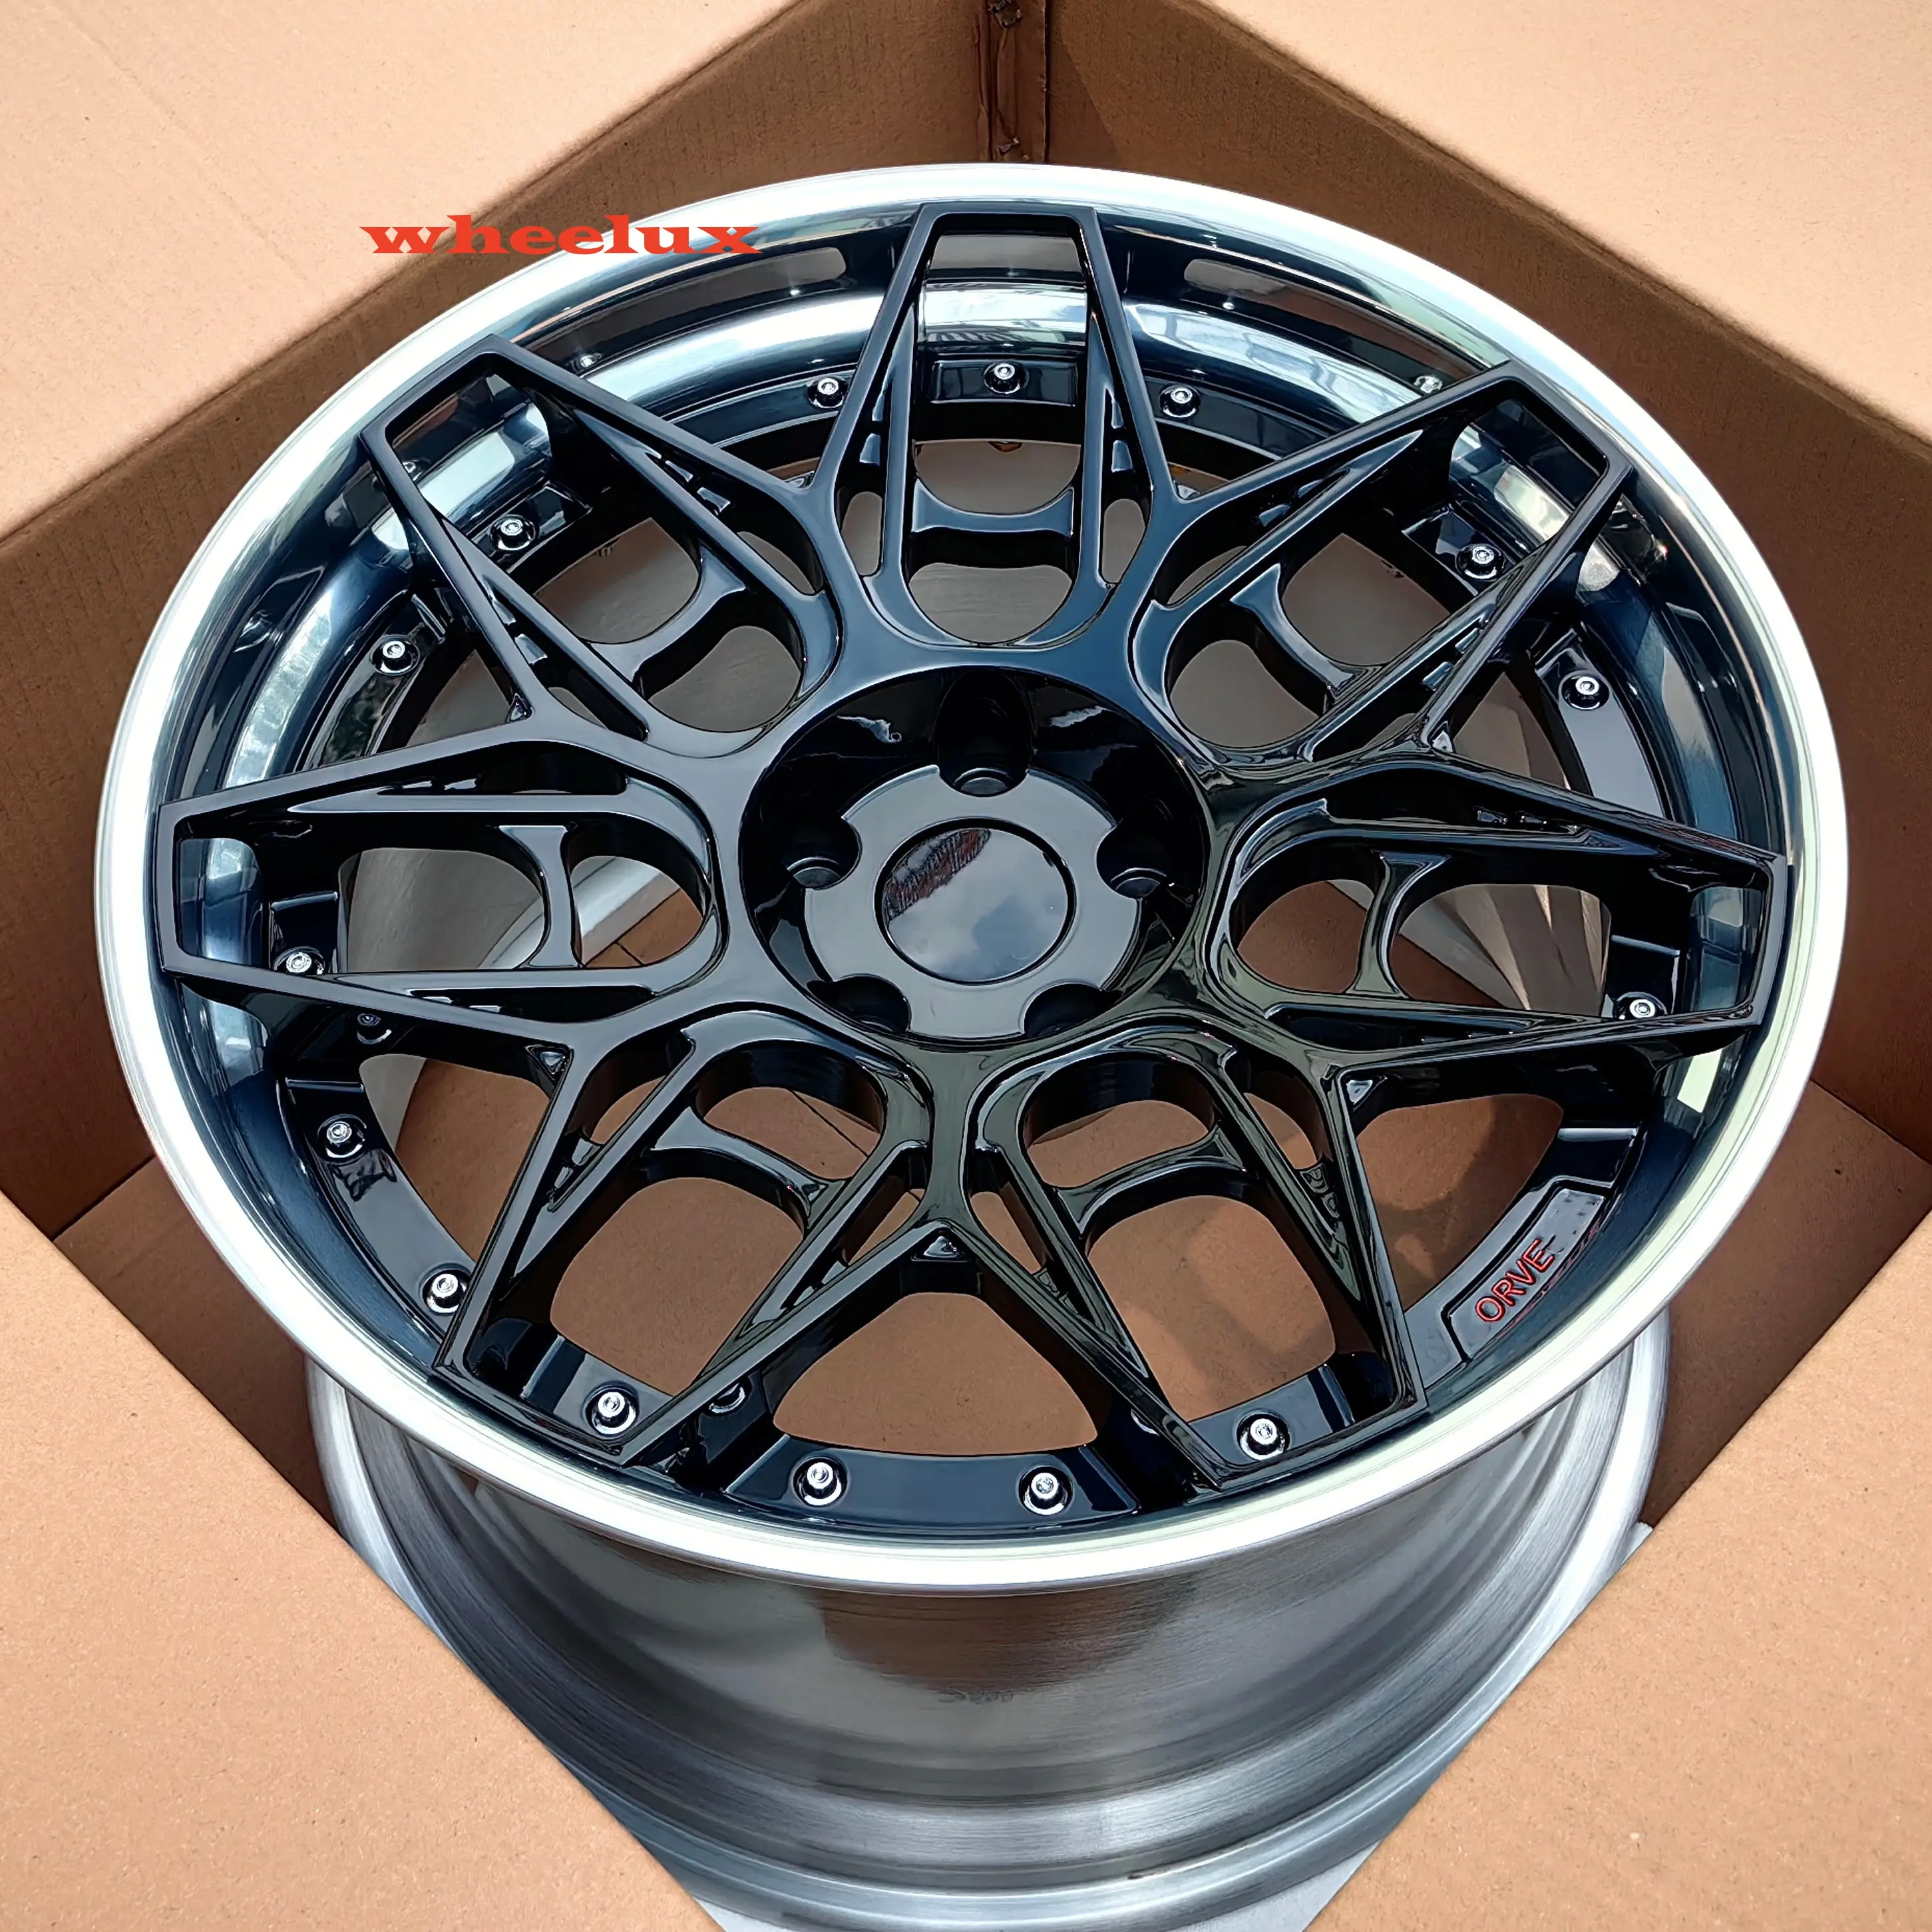 2 Pieces 5x112 Alloy Forged Rims Electroplate Steel Aluminum Wheels Forged Wheel For Corvette C8 Stingray C7 ZR1 Z06 C6 C5